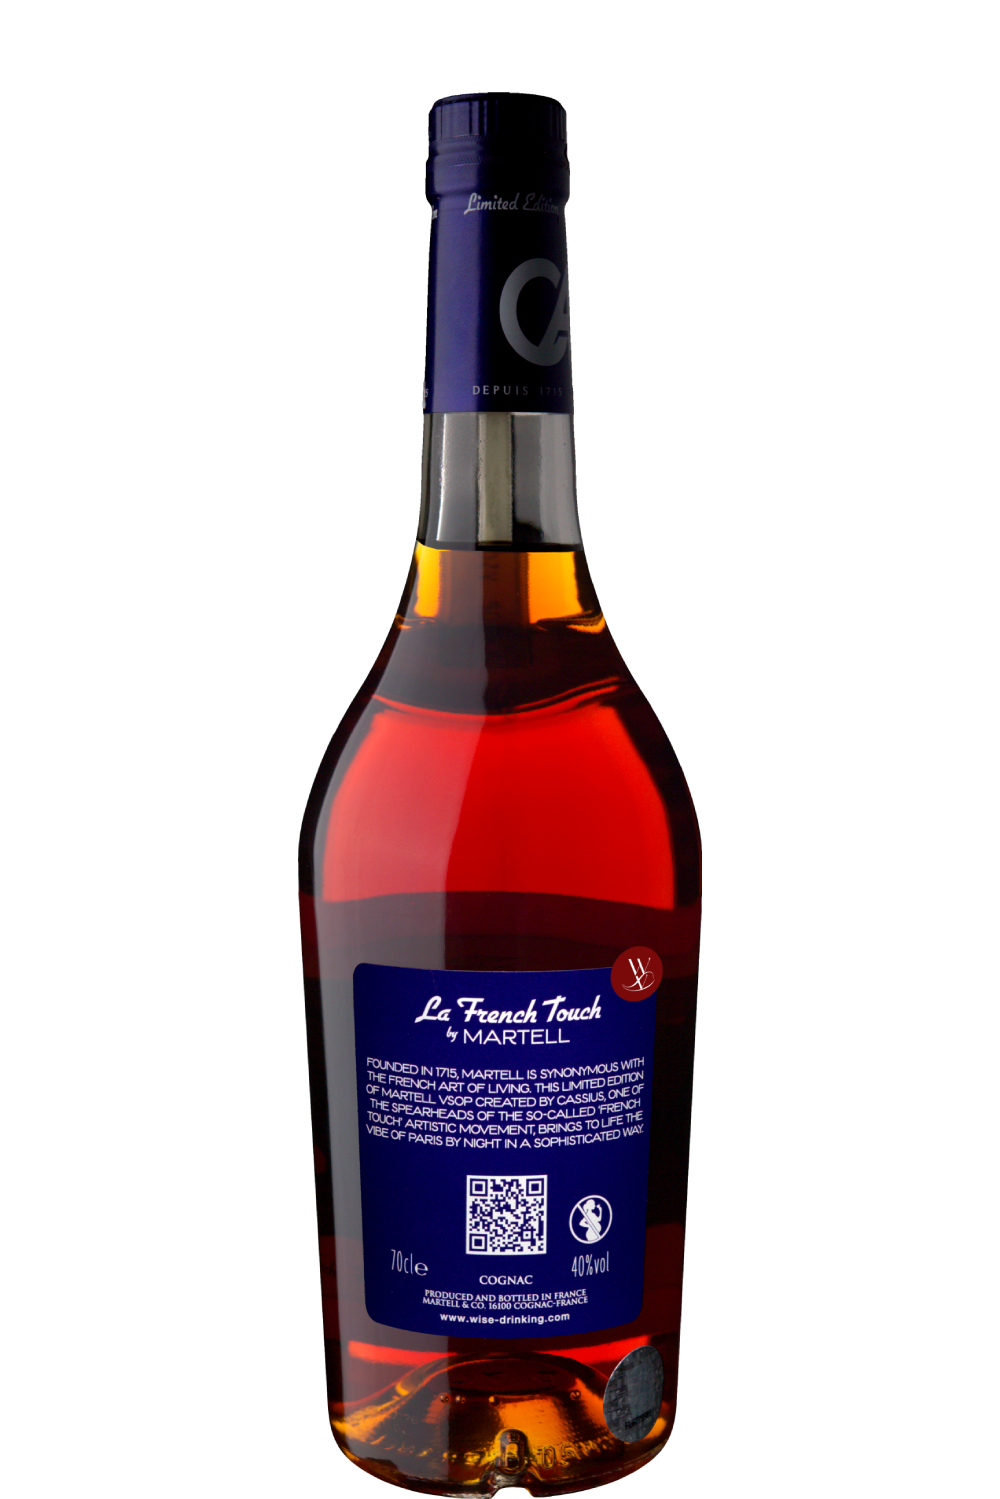 WineVins Martell VSOP La French Touch Edition